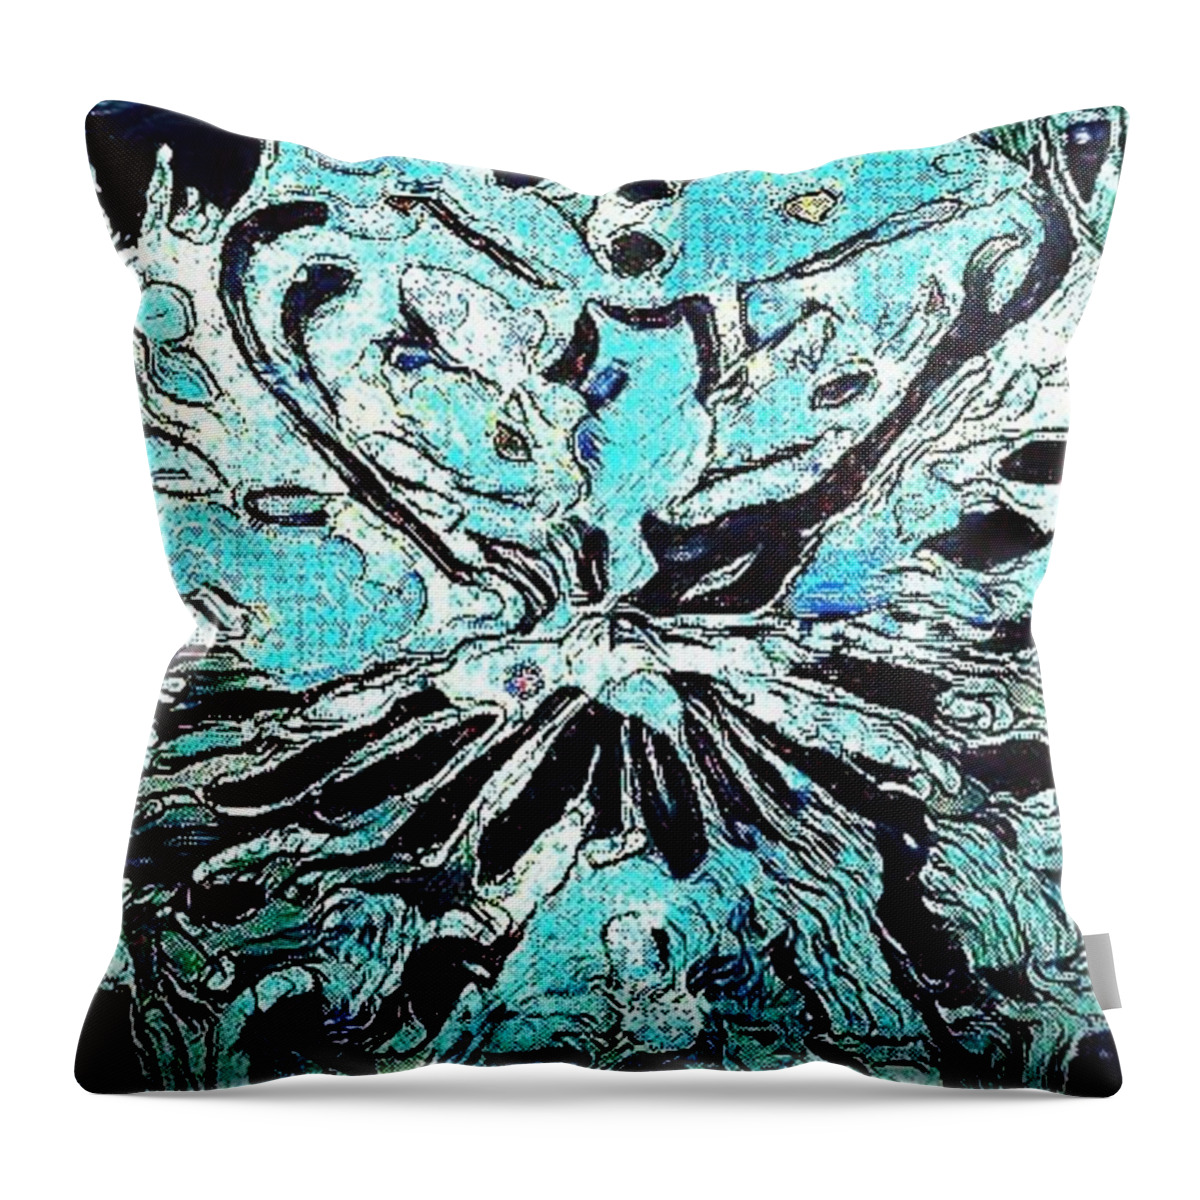 Blue Ice Throw Pillow featuring the drawing Blue Ice by Brenae Cochran